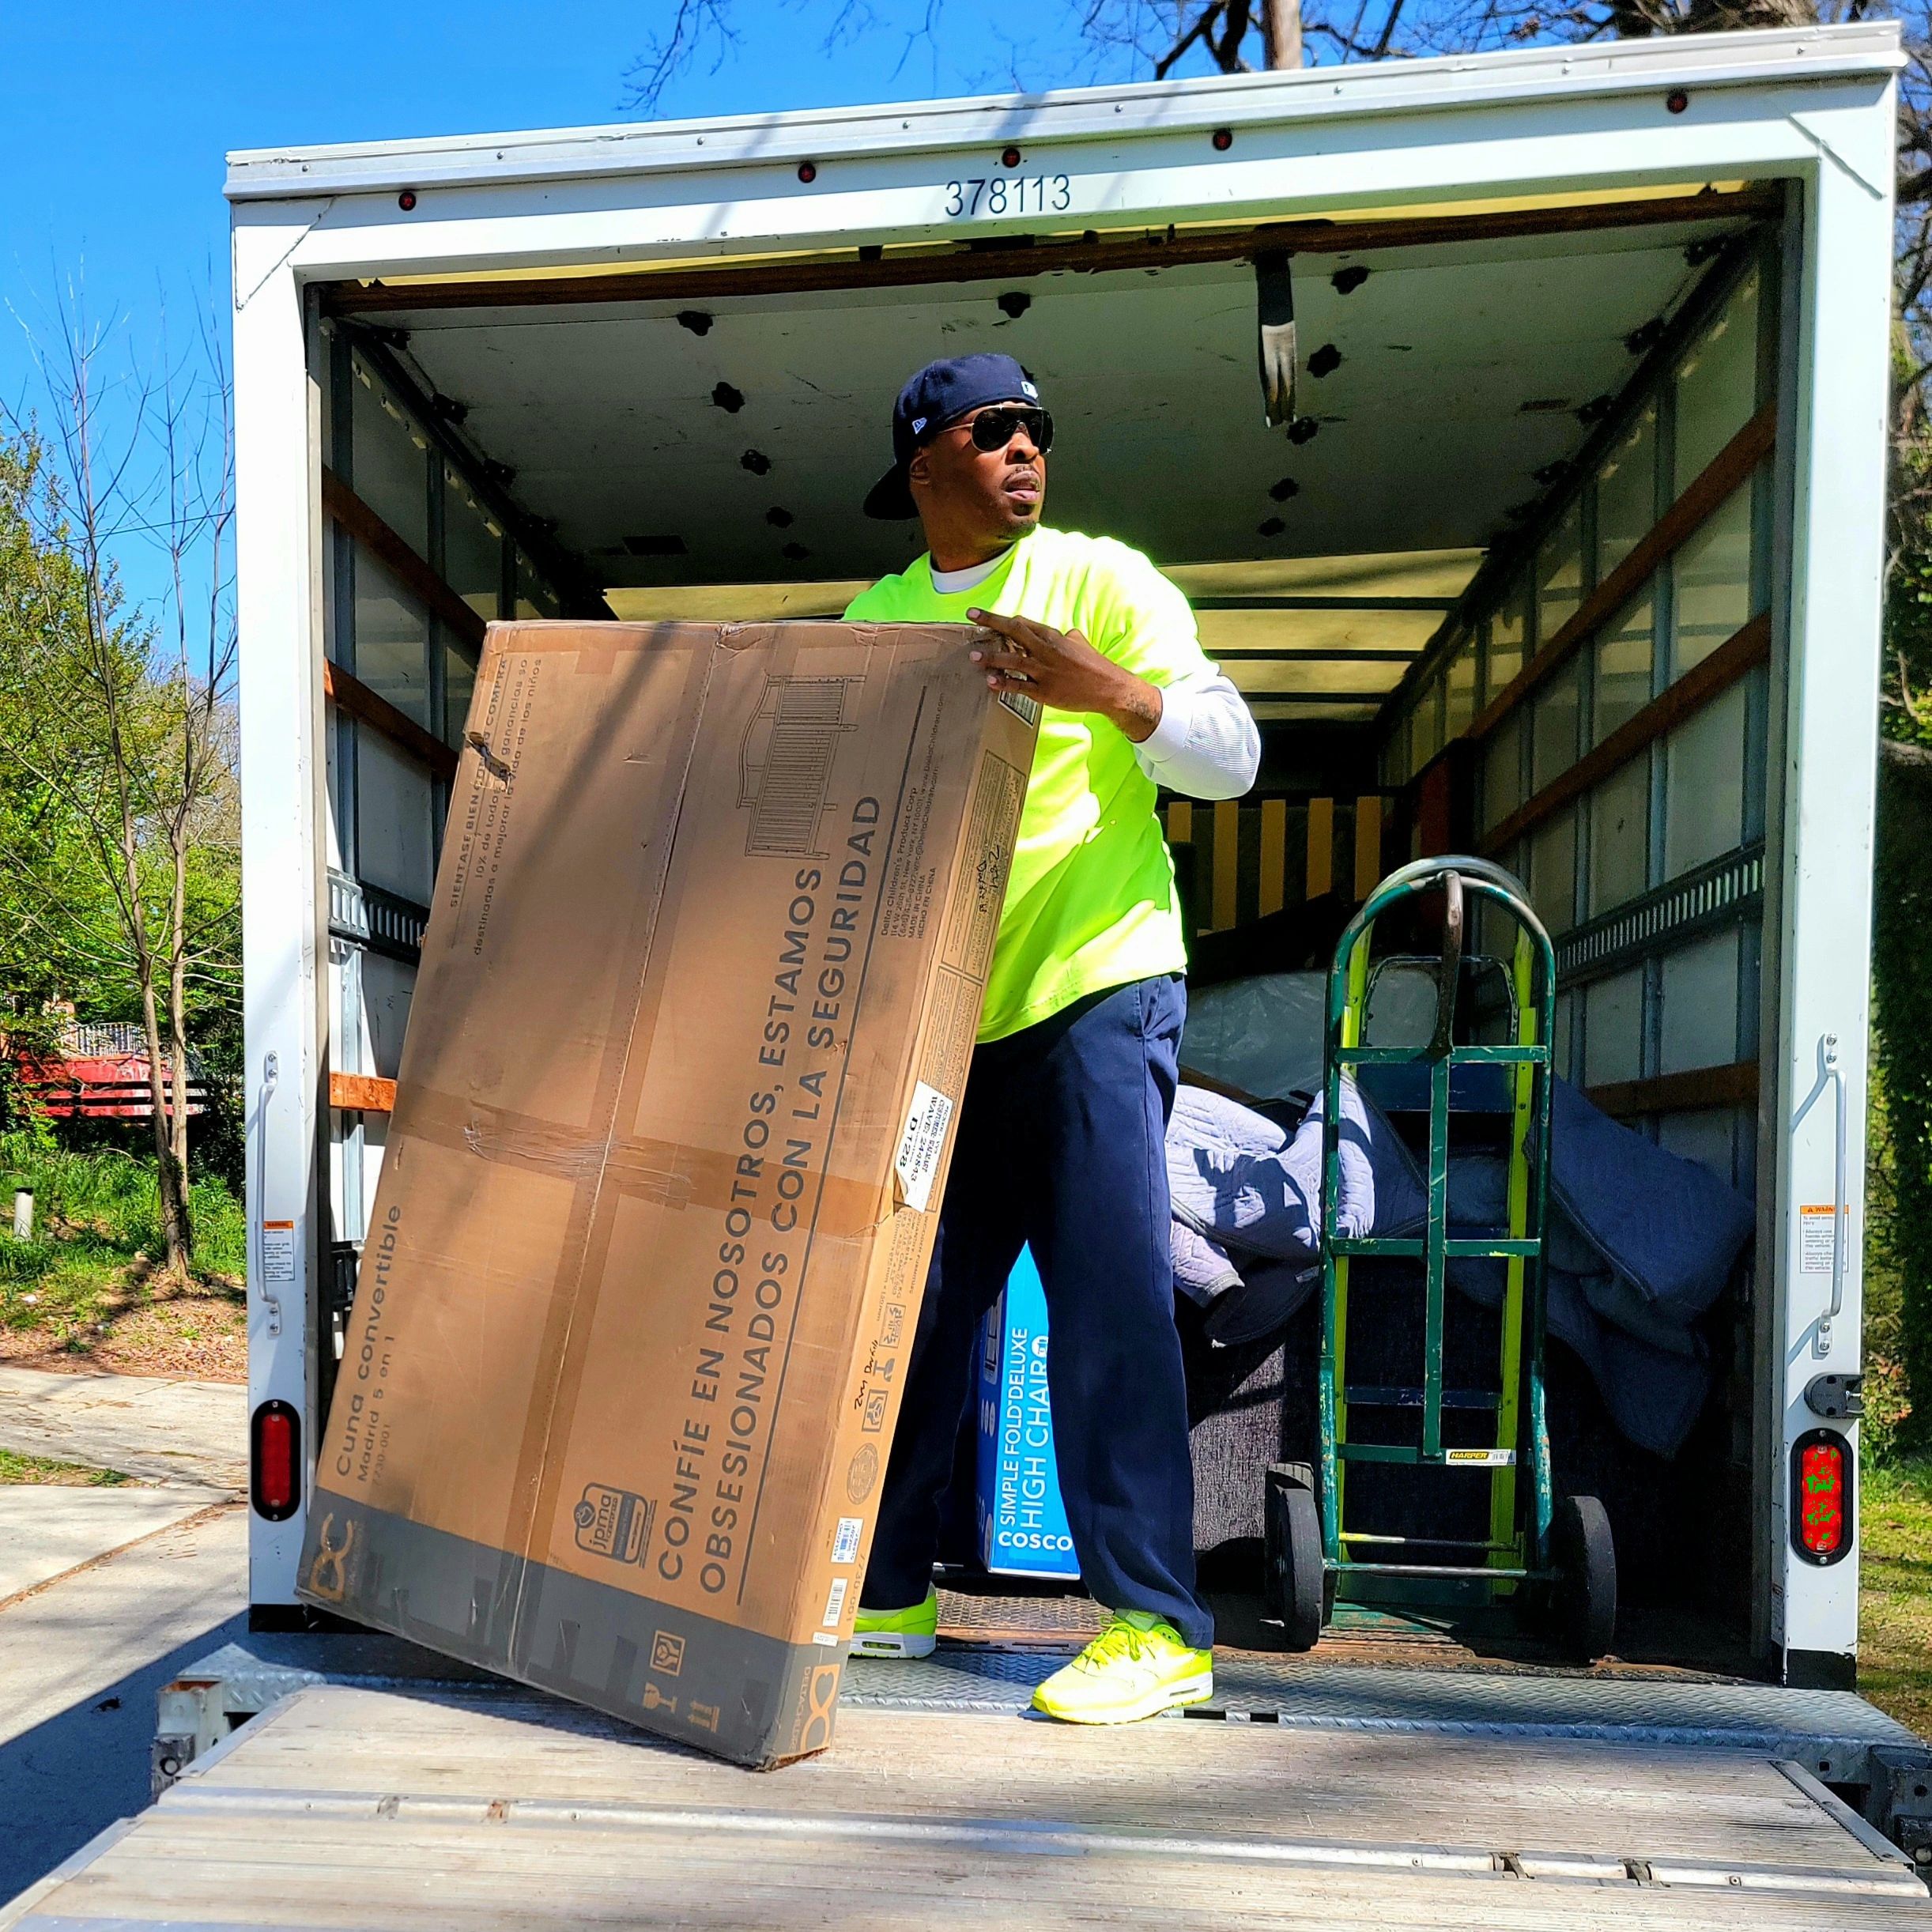 Mover standing on liftgate of moving truck holding box vertically wearing safety green shirt